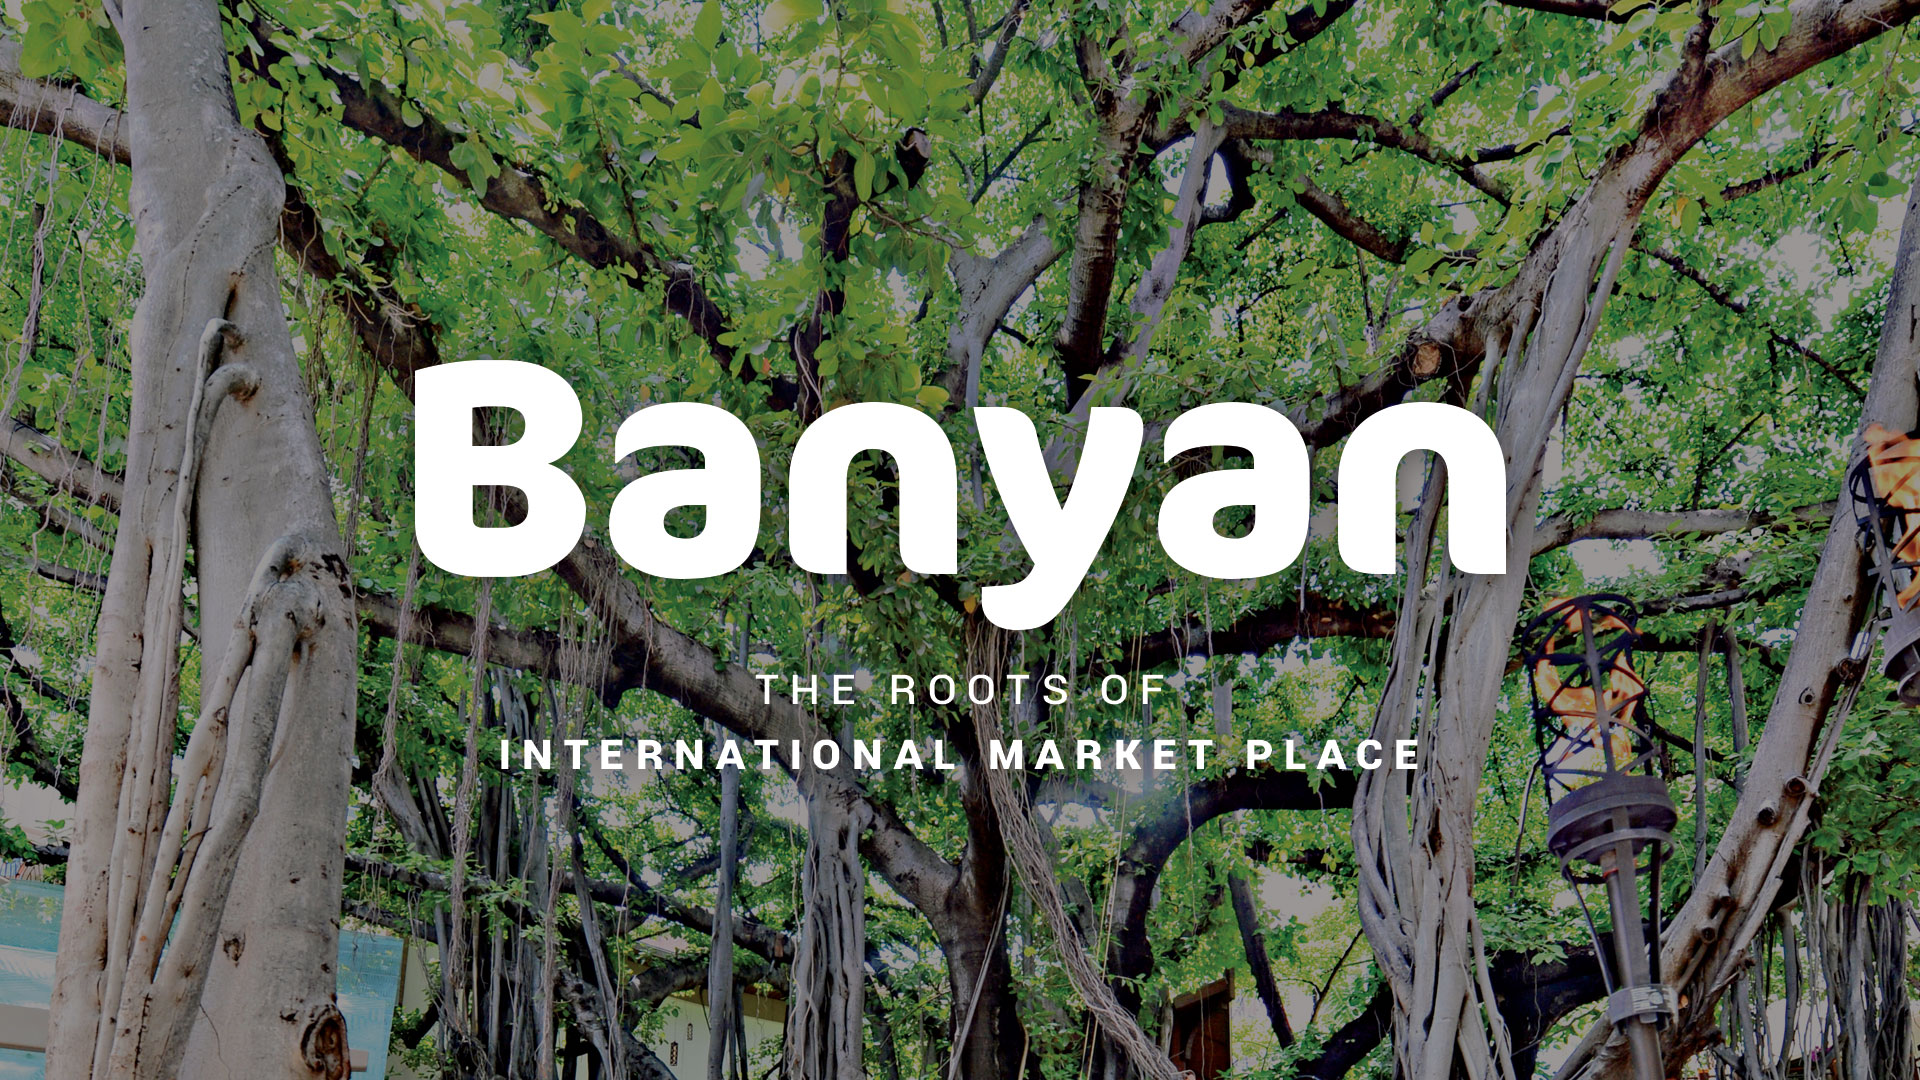 Banyan: The Roots of International Market Place